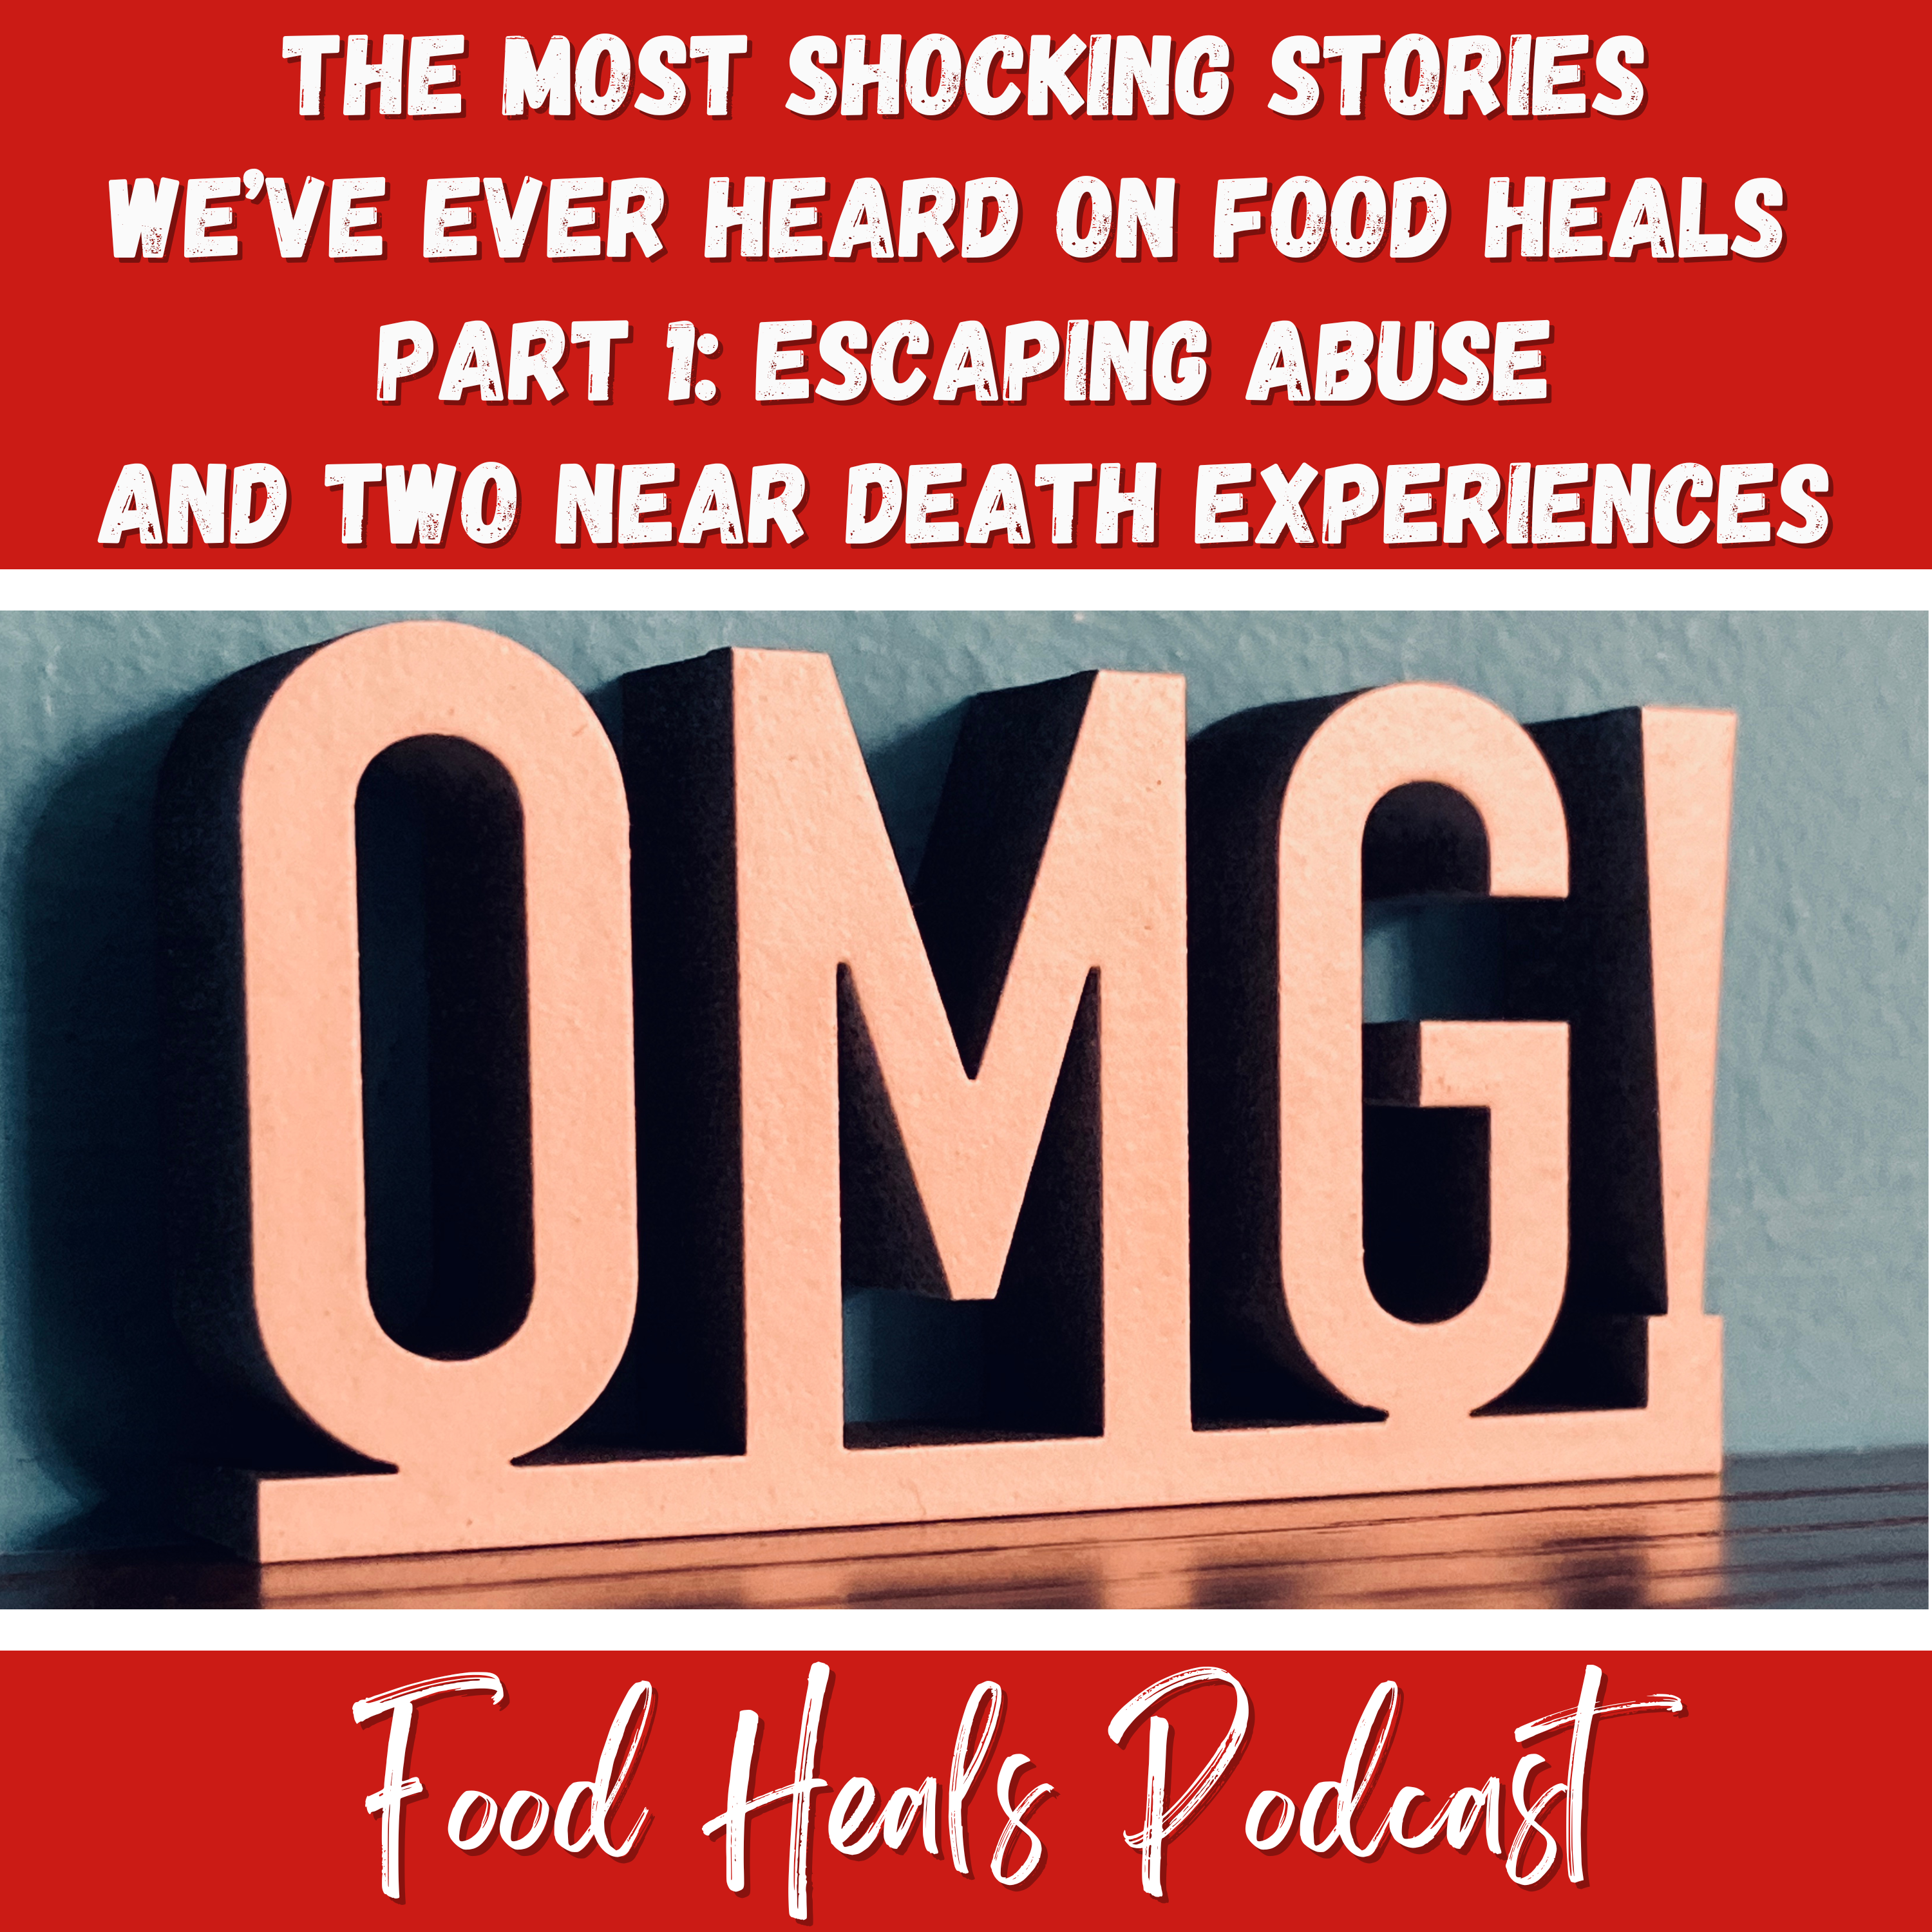 The Most Shocking Stories We’ve Ever Heard on Food Heals - Part 1: Escaping Abuse and Two Near Death Experiences